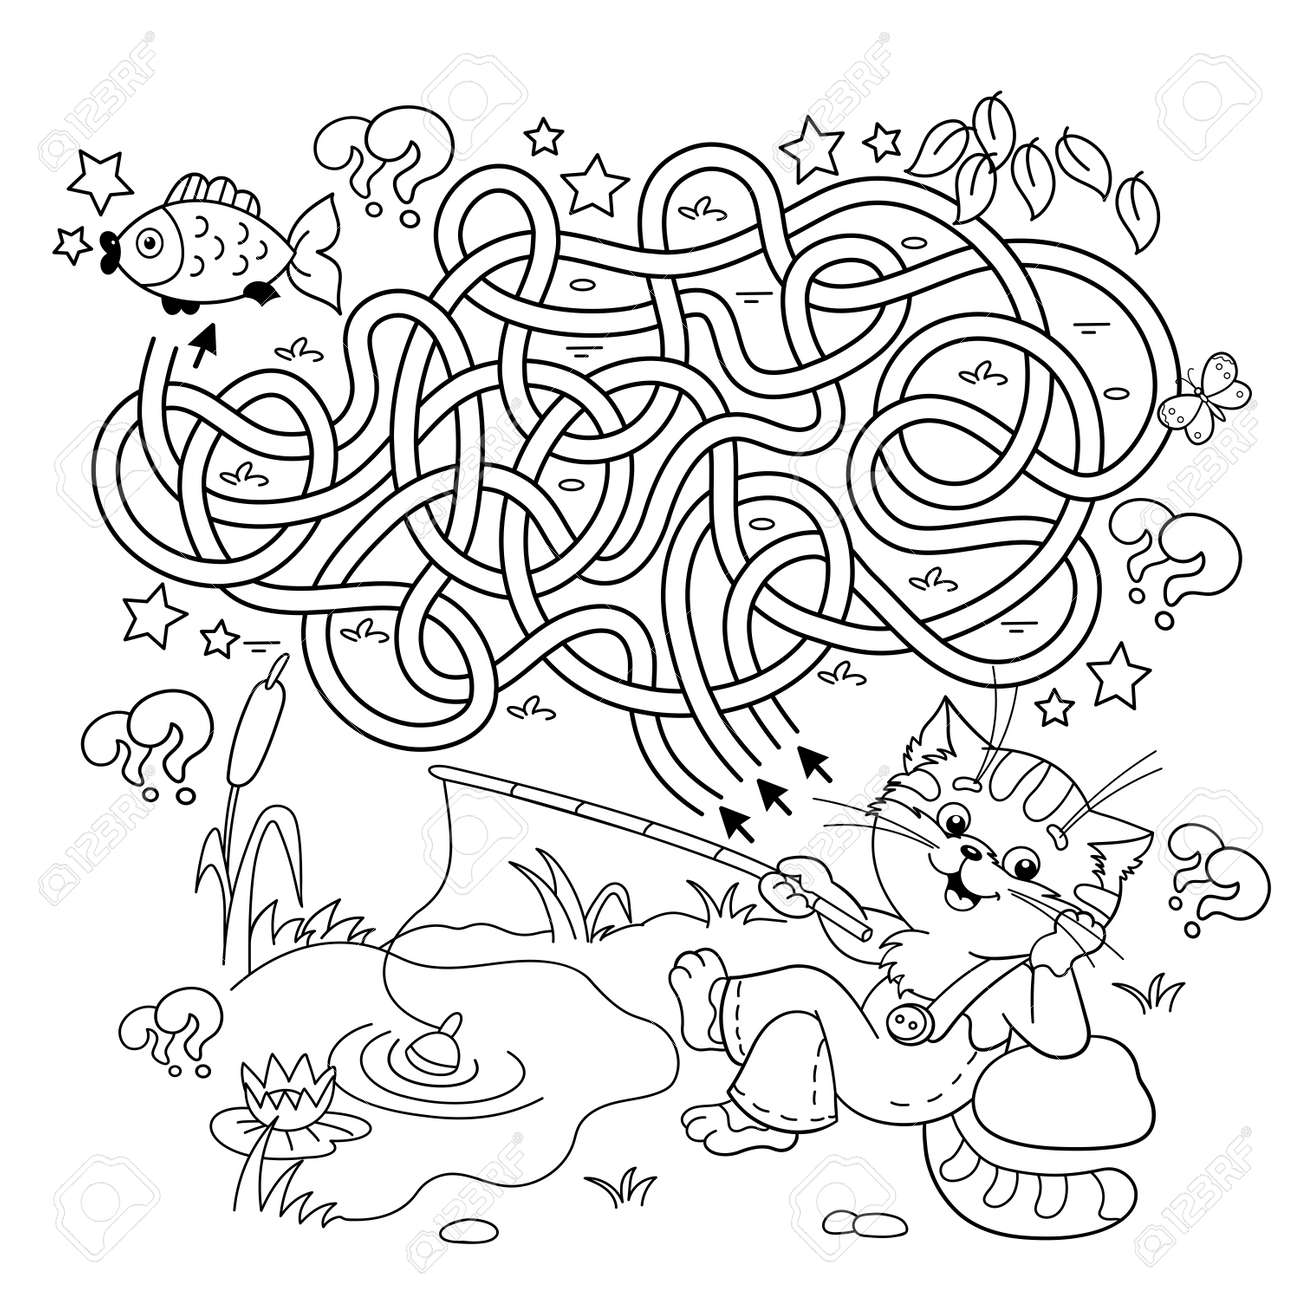 Maze or labyrinth game puzzle tangled road coloring page outline of cartoon cat with fishing rod fun fisher coloring book for kids royalty free svg cliparts vectors and stock illustration image